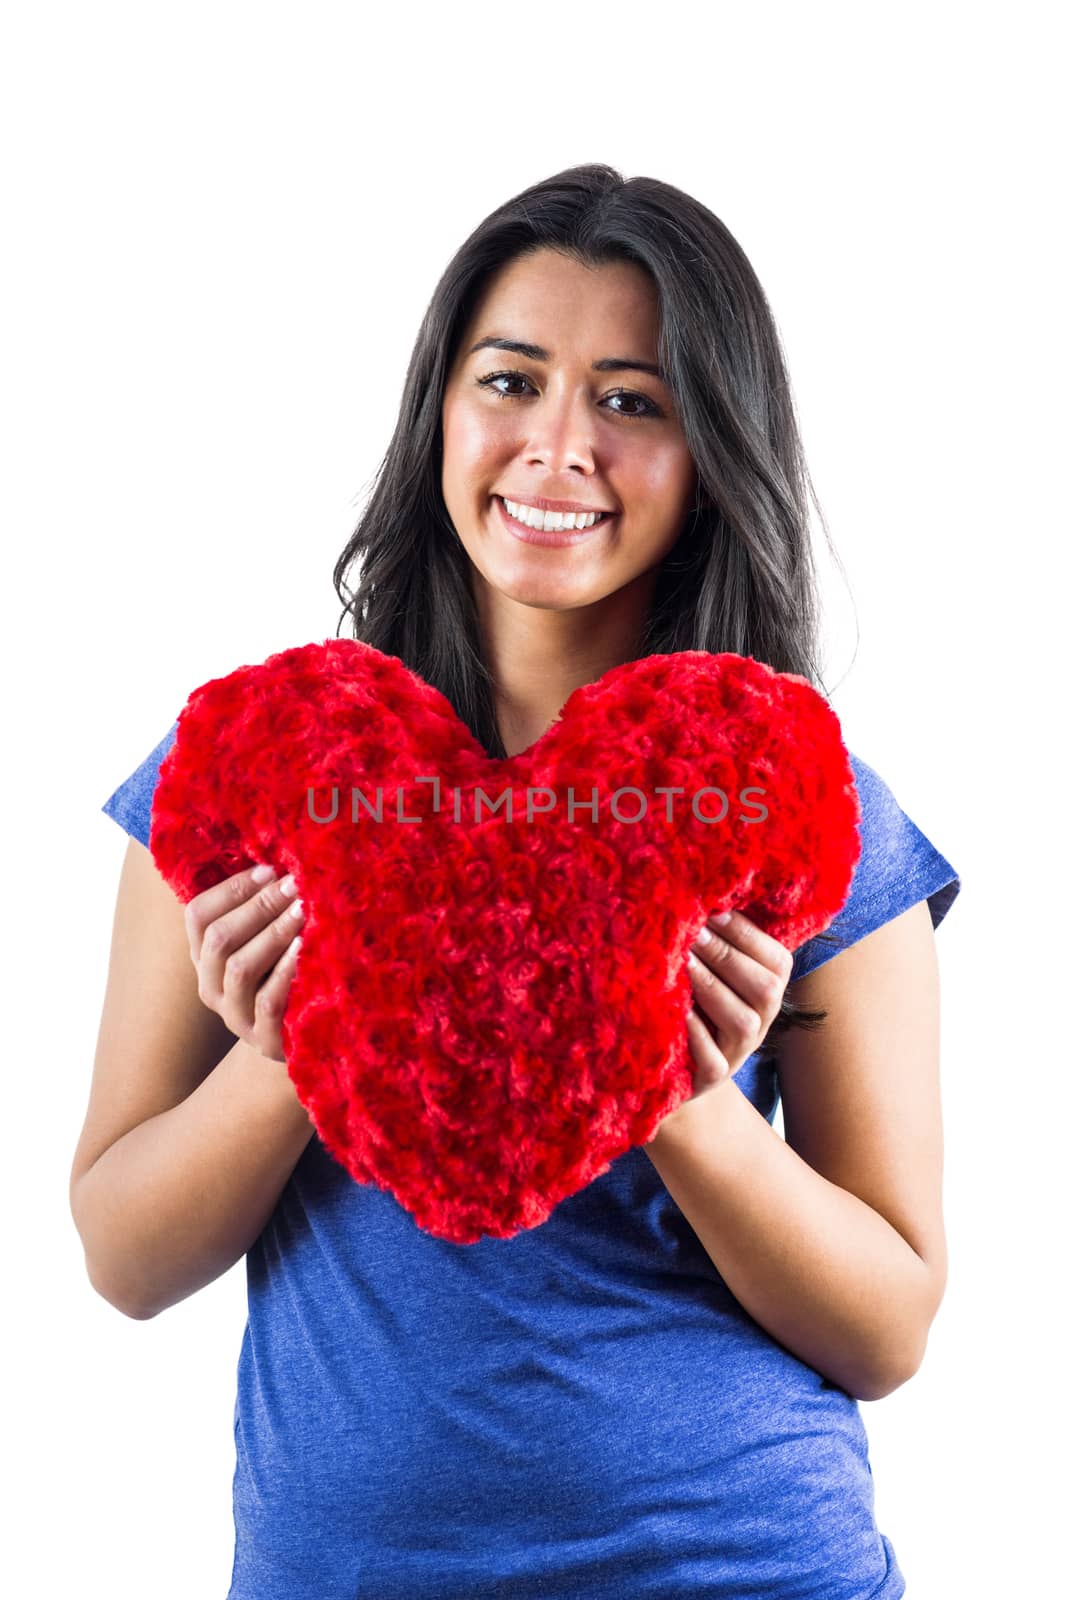 Smiling woman holding a heart shaped pillow by Wavebreakmedia